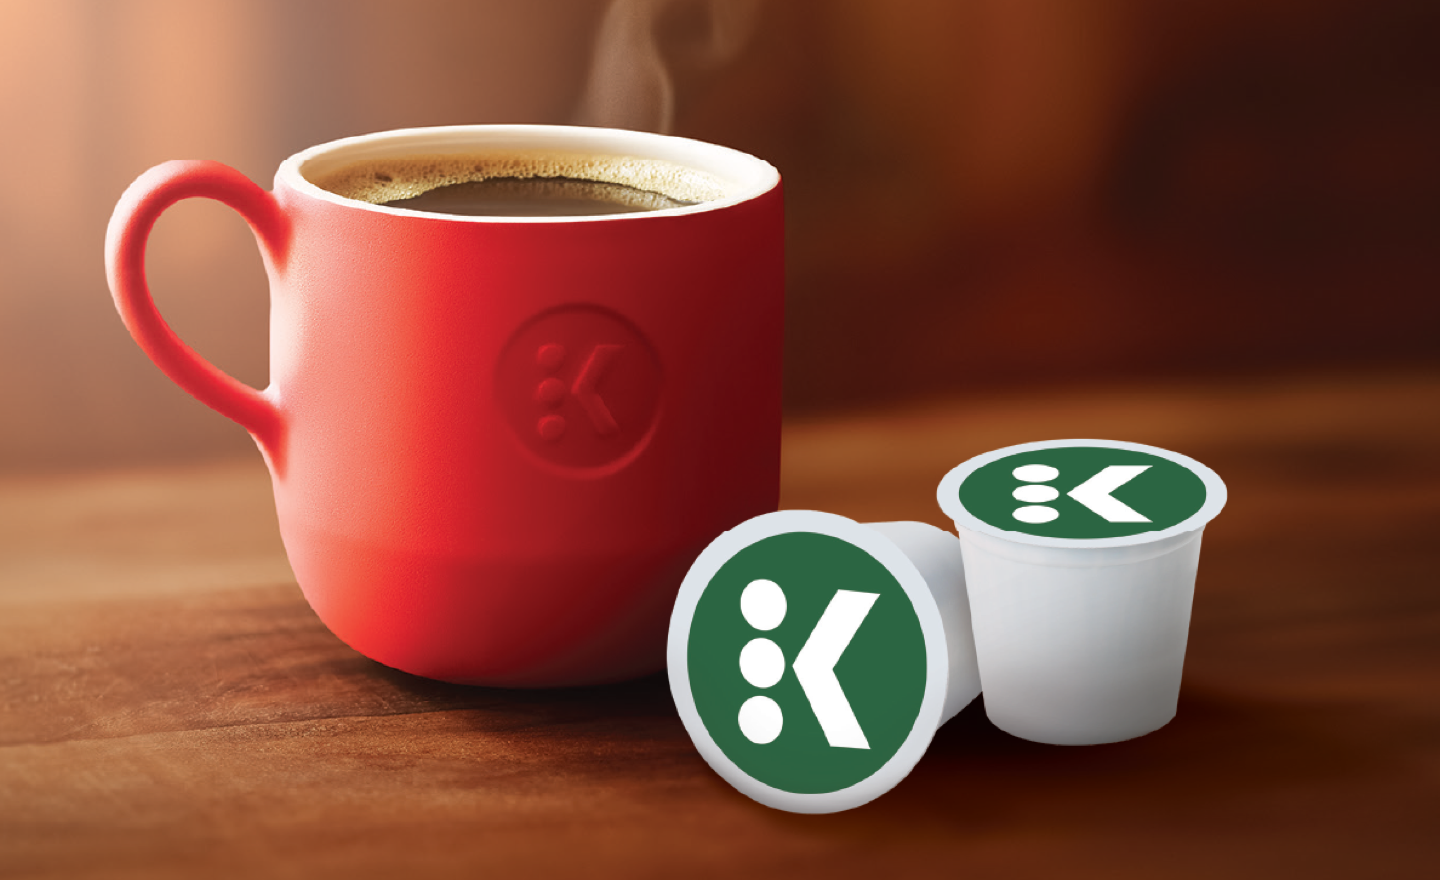 Warm mug of coffee next to two K-Cup pods